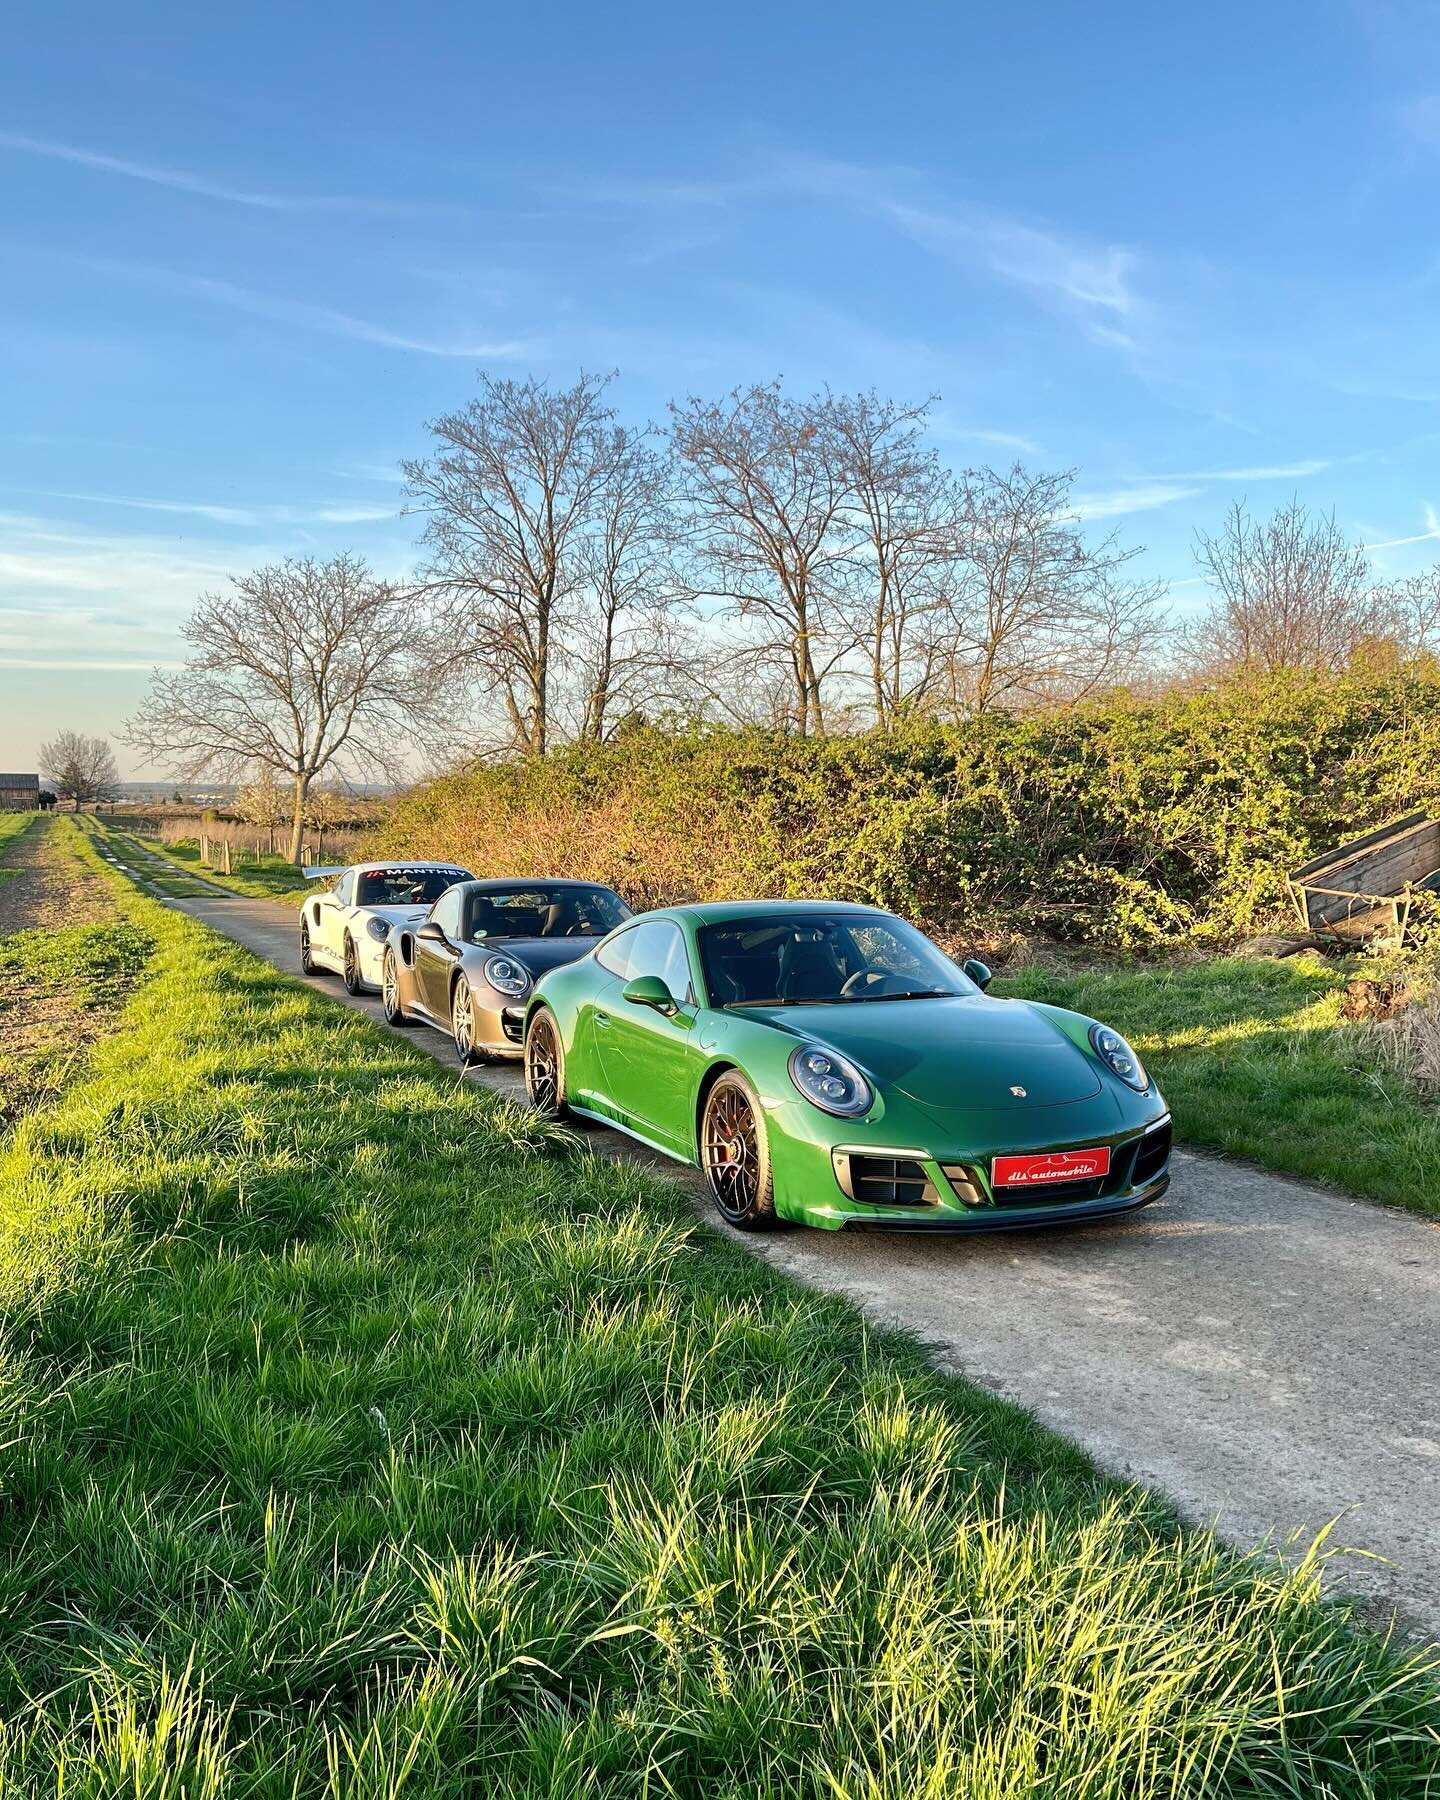 That &sbquo;together more than 1600hp&lsquo;-991-combo 😮&zwj;💨&hellip;⠀
⠀
More about the irish green GTS | the anthracite brown Turbo | the pure white GT3 RS online.⠀
⠀
#dlsautomobile #porsche #porsche911 #porsche991 #porschegts #991gts #porschetur